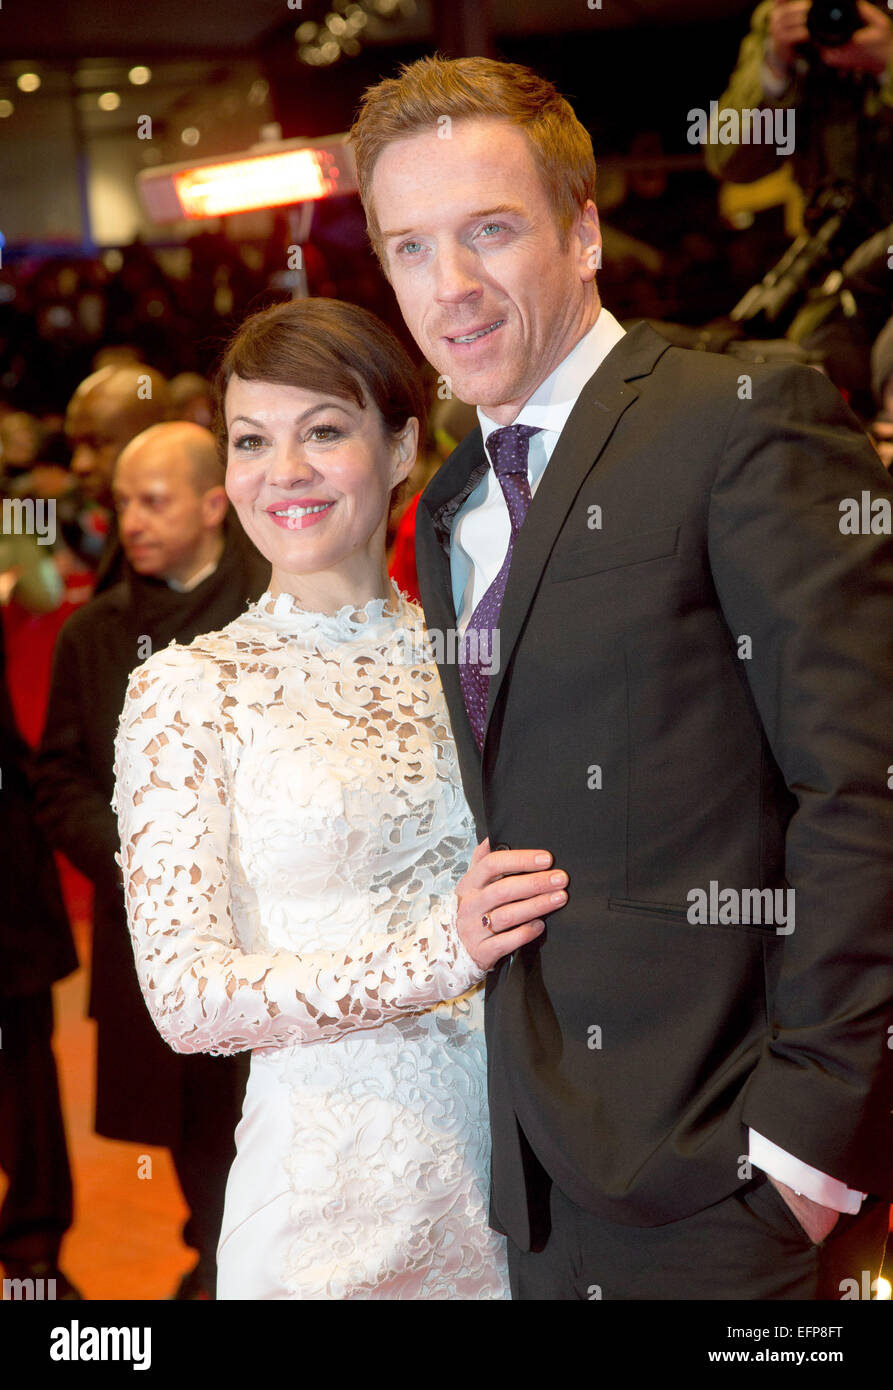 British actor Damian Lewis and his wife Helen McCrory attend the premiere of the movie 'Queen Of The Desert' during the 65th International Berlin Film Festival, Berlinale, in Berlin, Germany, on 06 February 2015. Photo: Hubert Boesl/dpa /dpa - NO WIRE SERVICE - Stock Photo